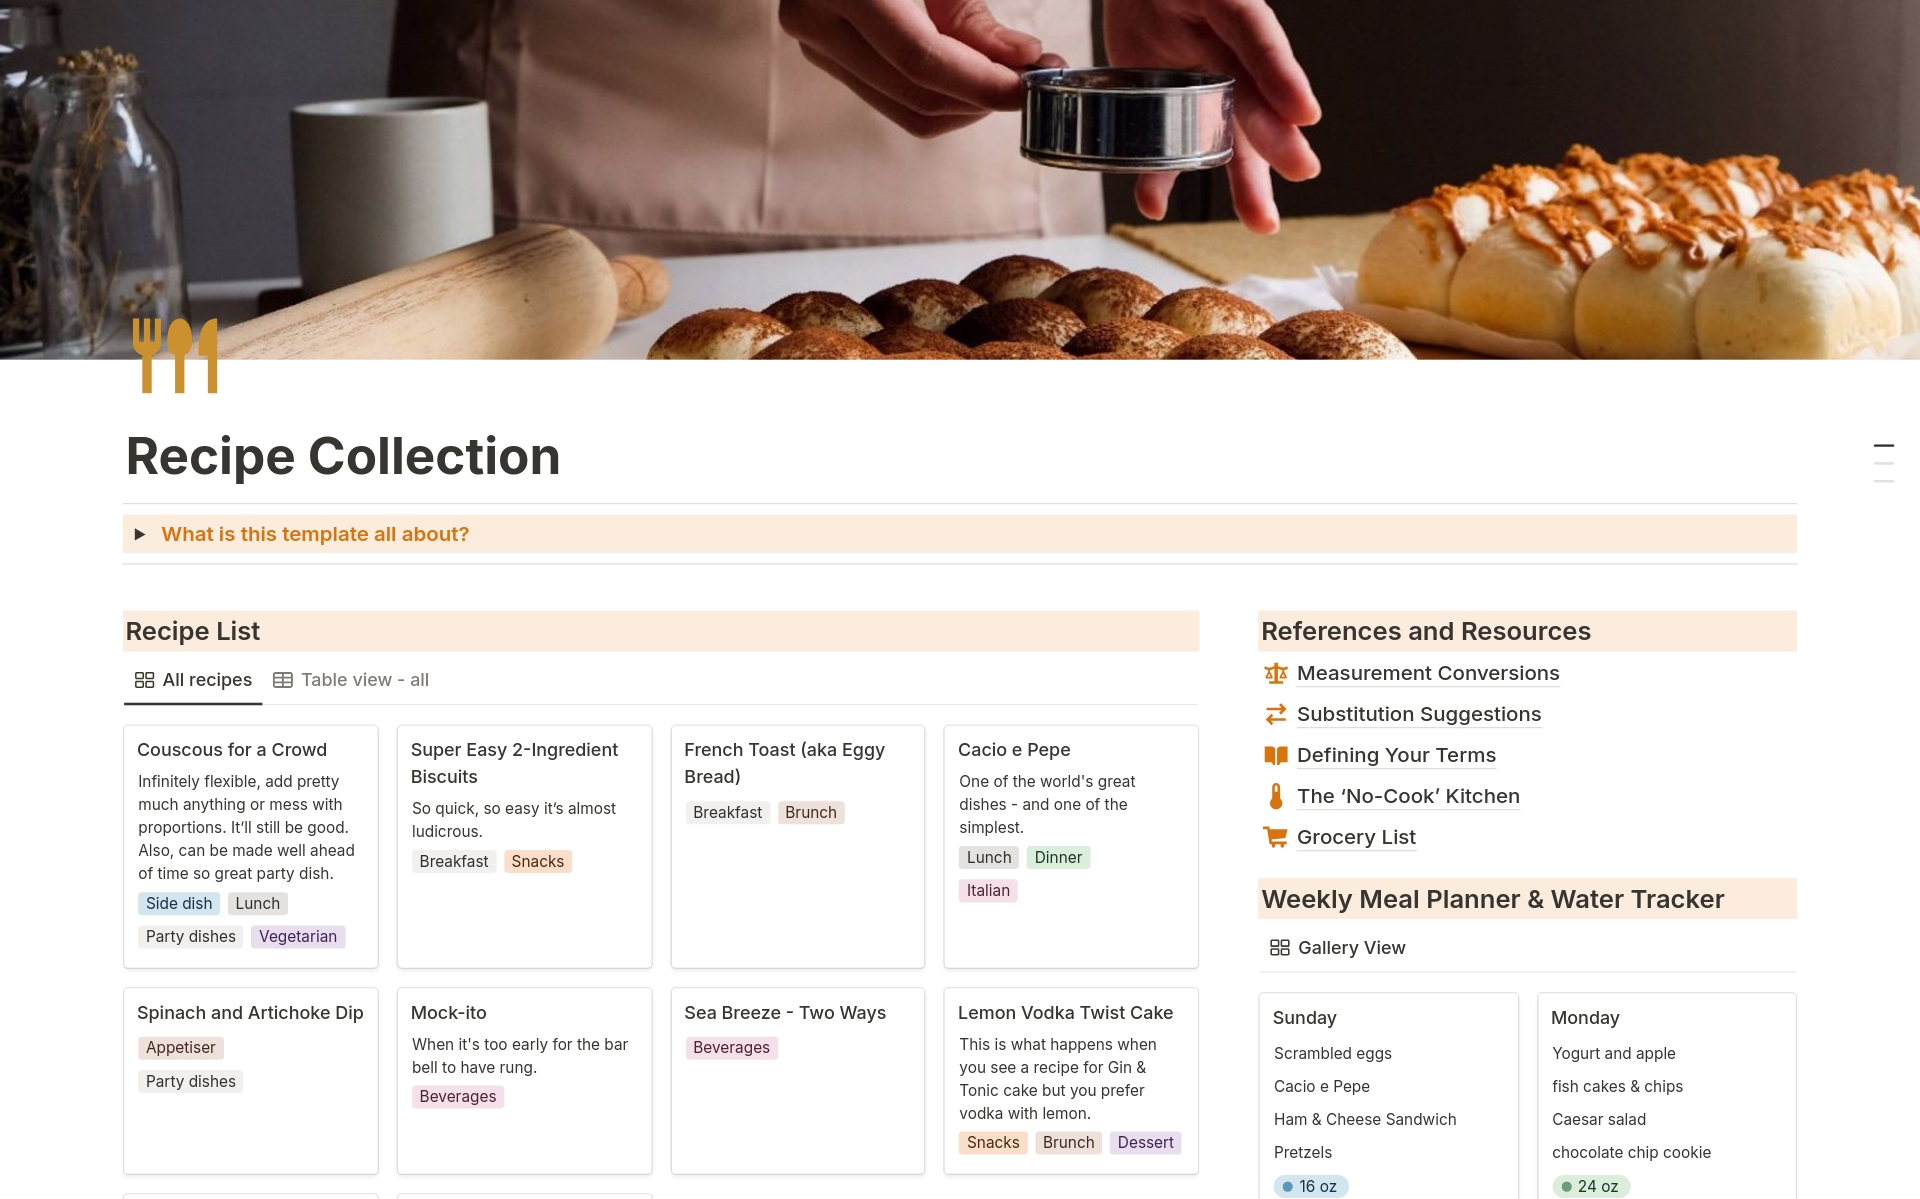 Looking to simplify the process of collecting and organizing a collection of recipes? This recipe collection is the answer  - store & sort recipes, keep notes on tweaks, keep a running grocery list, use handy measurement conversion charts, get ingredient swap suggestions & more!